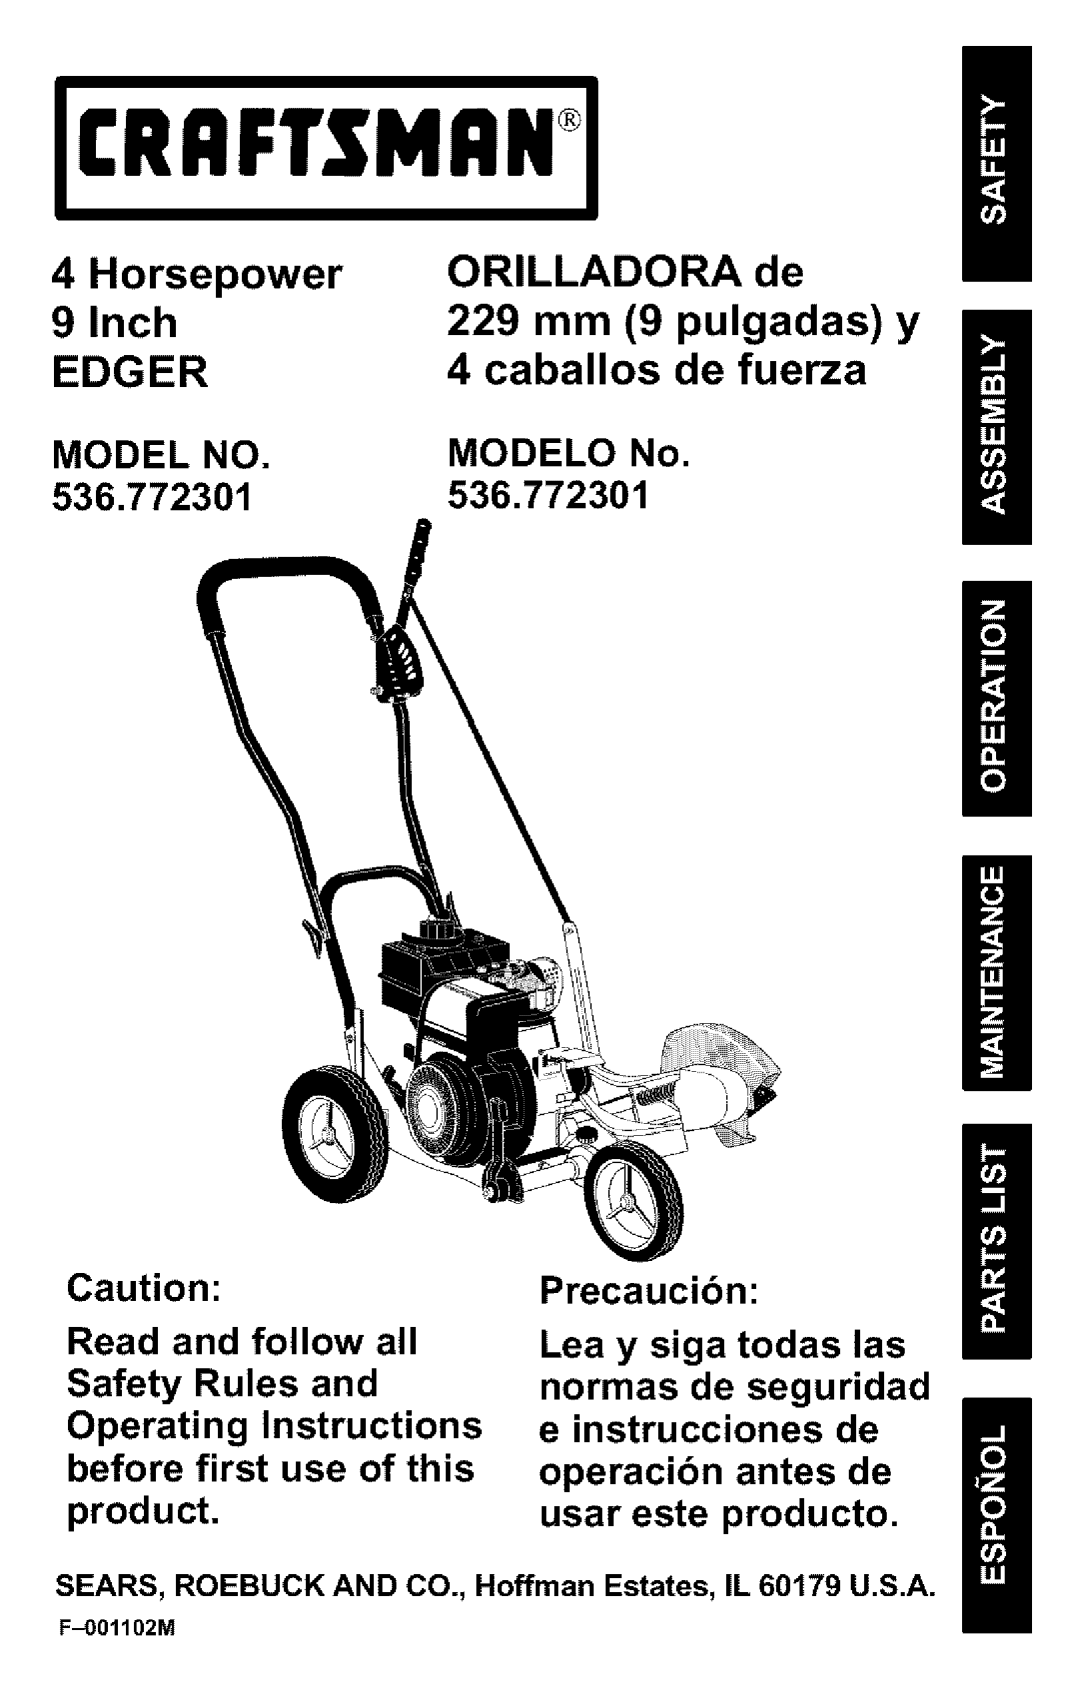 Craftsman 536.772301 manual Model No, MODELO No, Read and follow all Safety Rules and, product, Precaucibn, Horsepower 